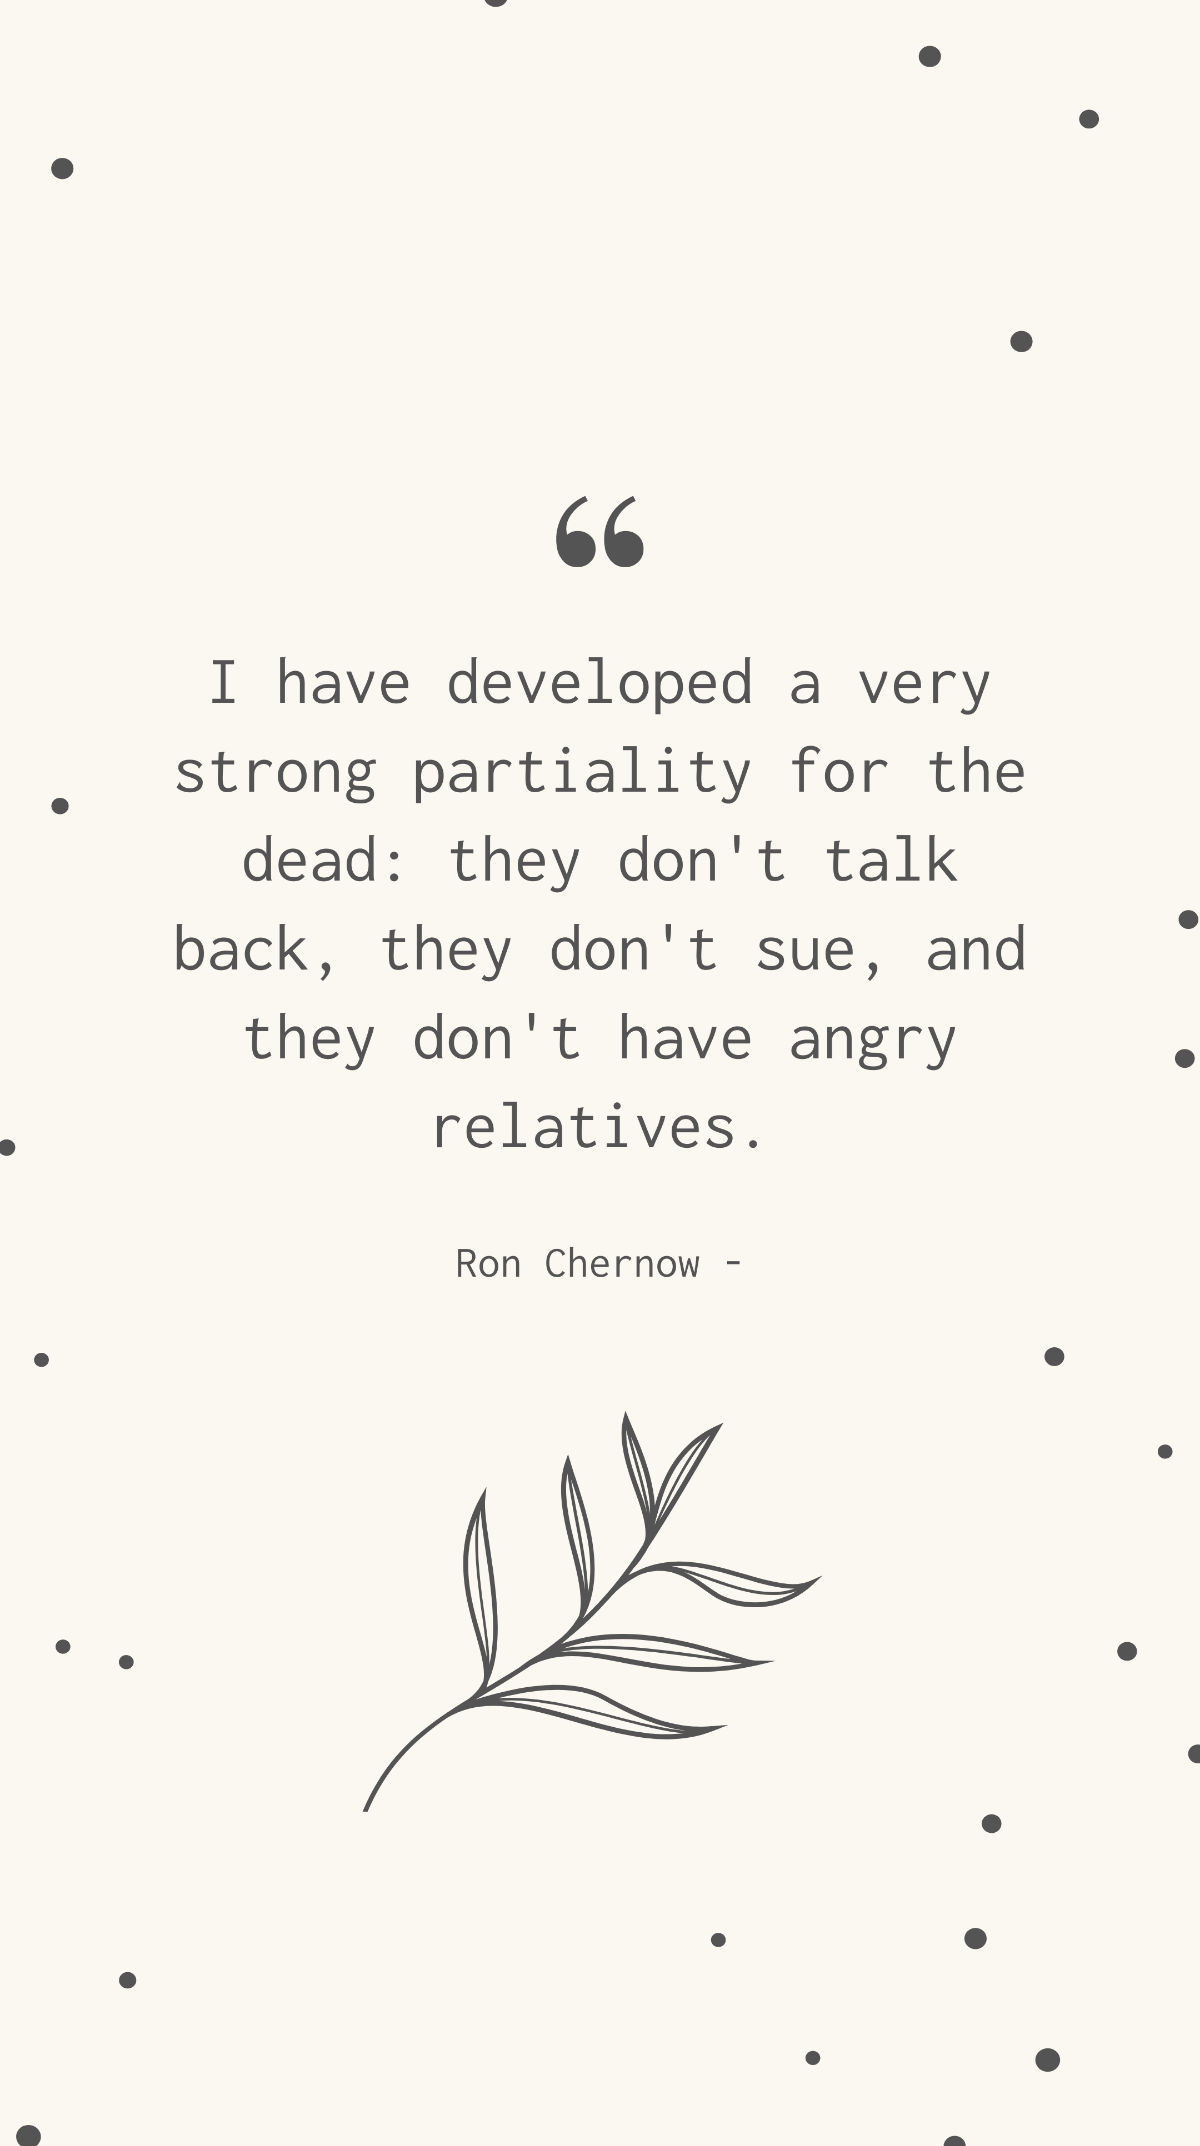 Ron Chernow - I have developed a very strong partiality for the dead: they don't talk back, they don't sue, and they don't have angry relatives. Template